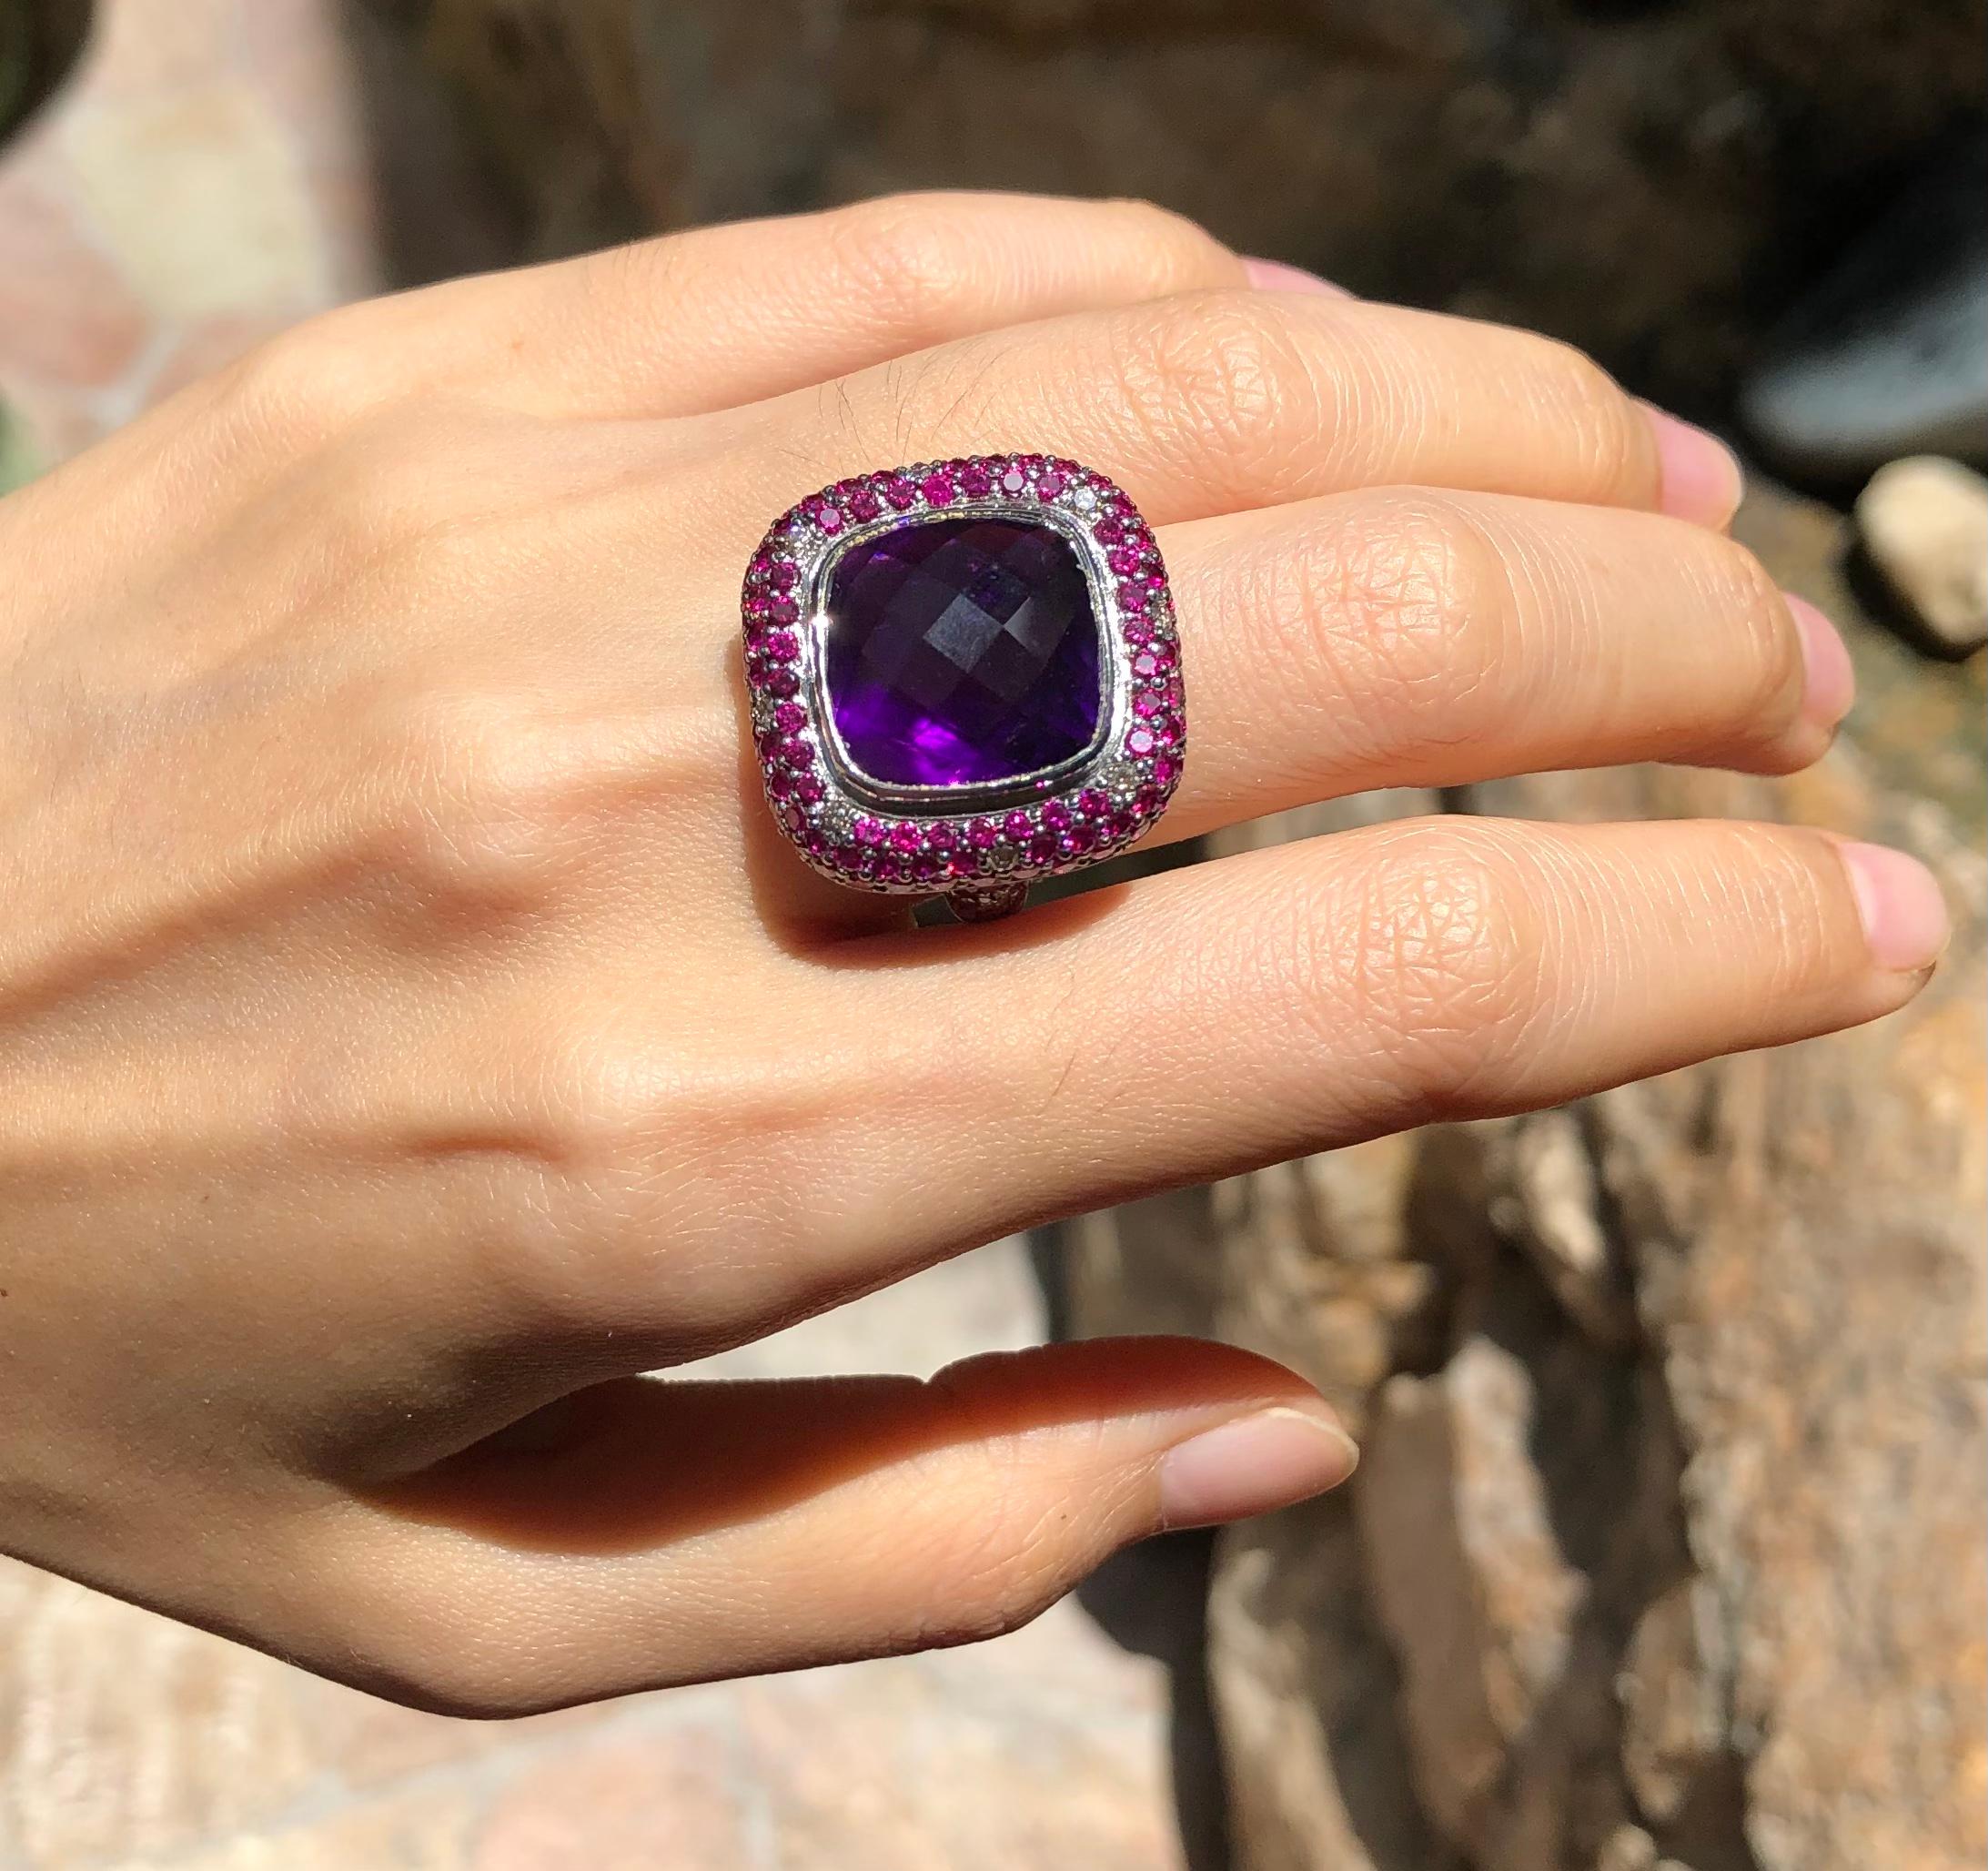 Amethyst 10.50 carats with Ruby 2.74 carats and Brown Diamond 0.24 carats Ring set in 18 Karat White Gold Settings

Width:  2.3 cm 
Length:  2.3 cm
Ring Size: 51
Total Weight: 14.89 grams

